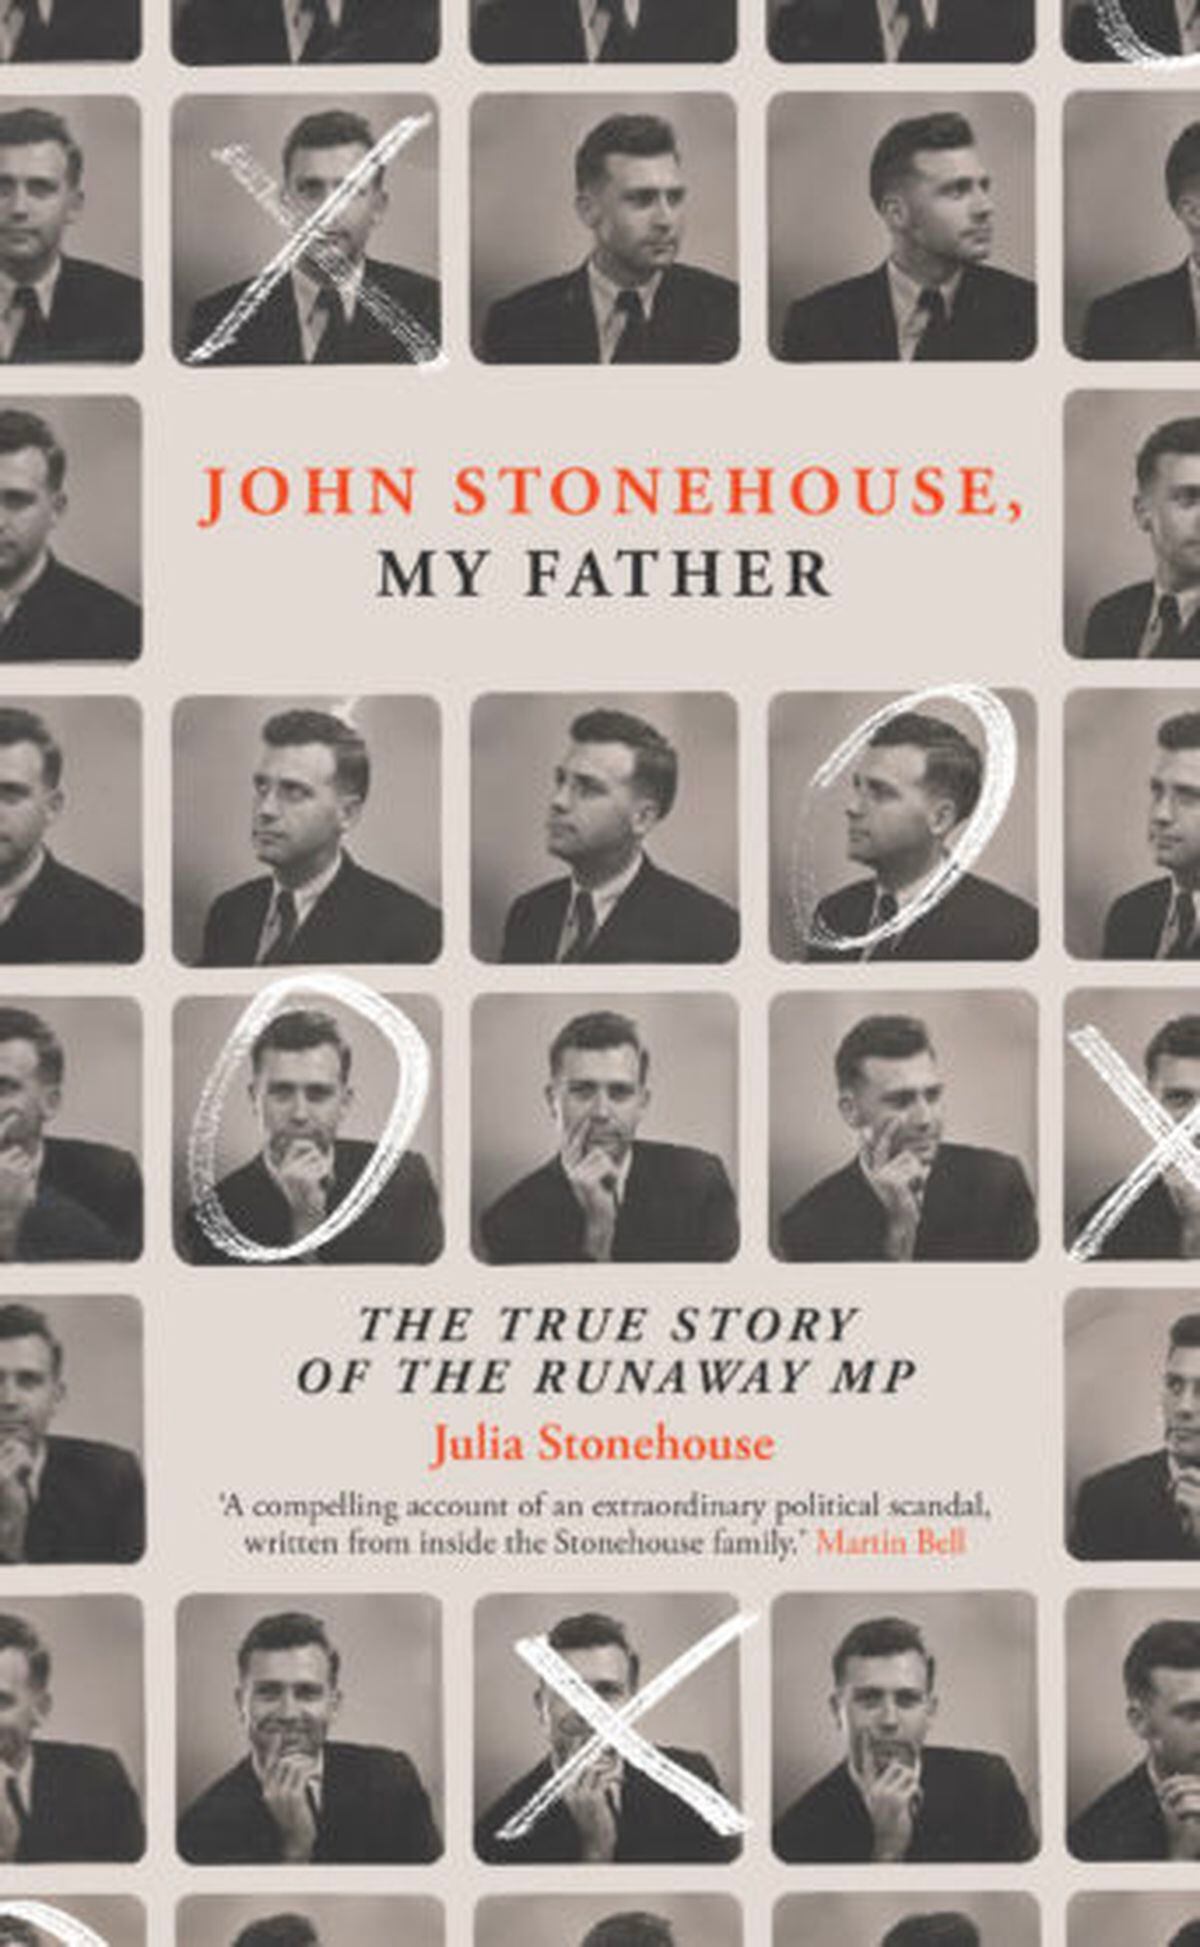 Julia Stonehouse has written a new book about her father, former Black Country MP and cabinet minister John Stonehouse